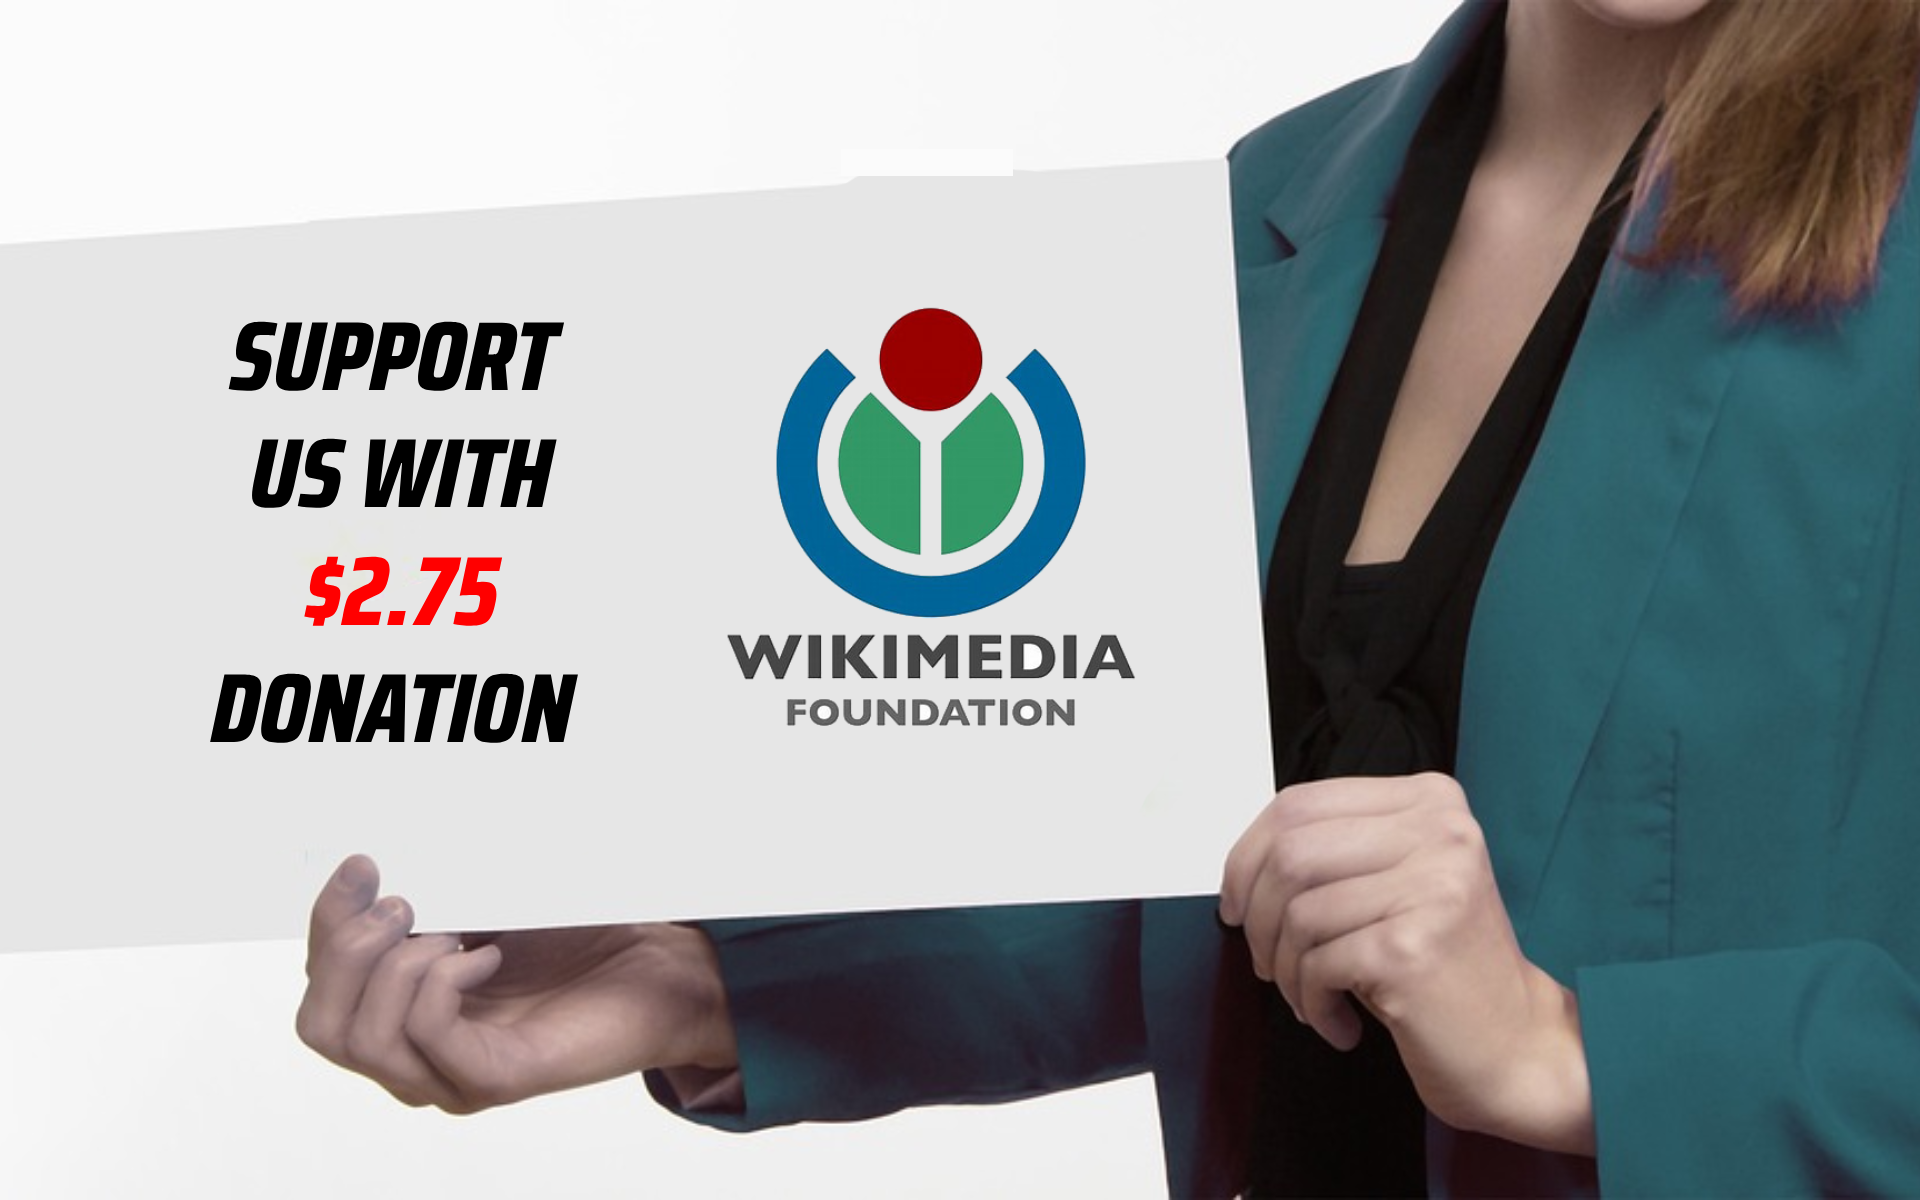 Wikipedia needs your support. Donate as little as $2.75 to support us